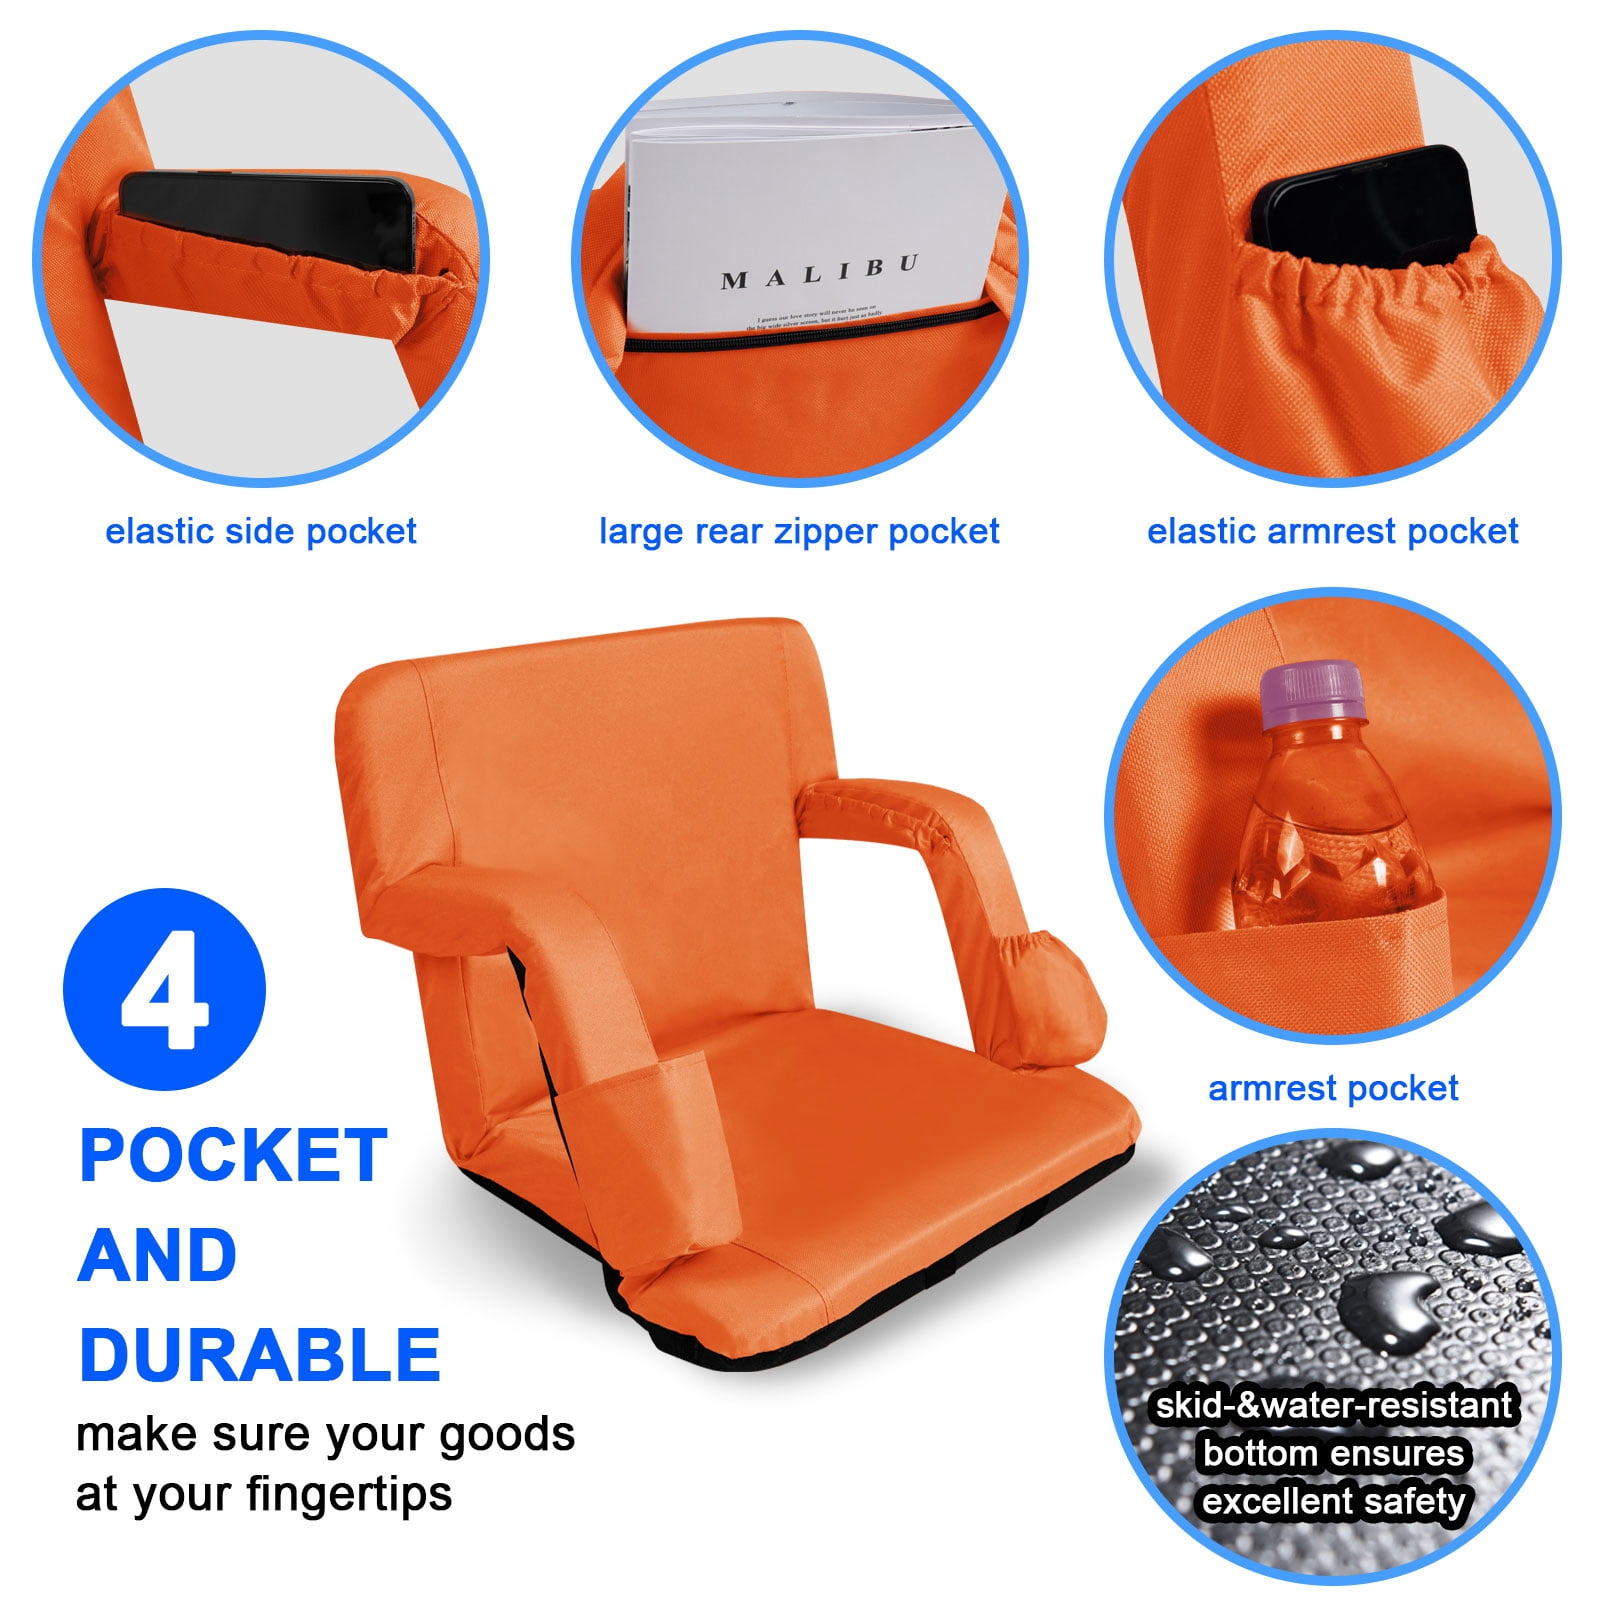 Wide Stadium Seat Chair - Bleacher Cushion with Padded Back Support,  Armrests, 6 Reclining Positions by Home-Complete - Bed Bath & Beyond -  24232575